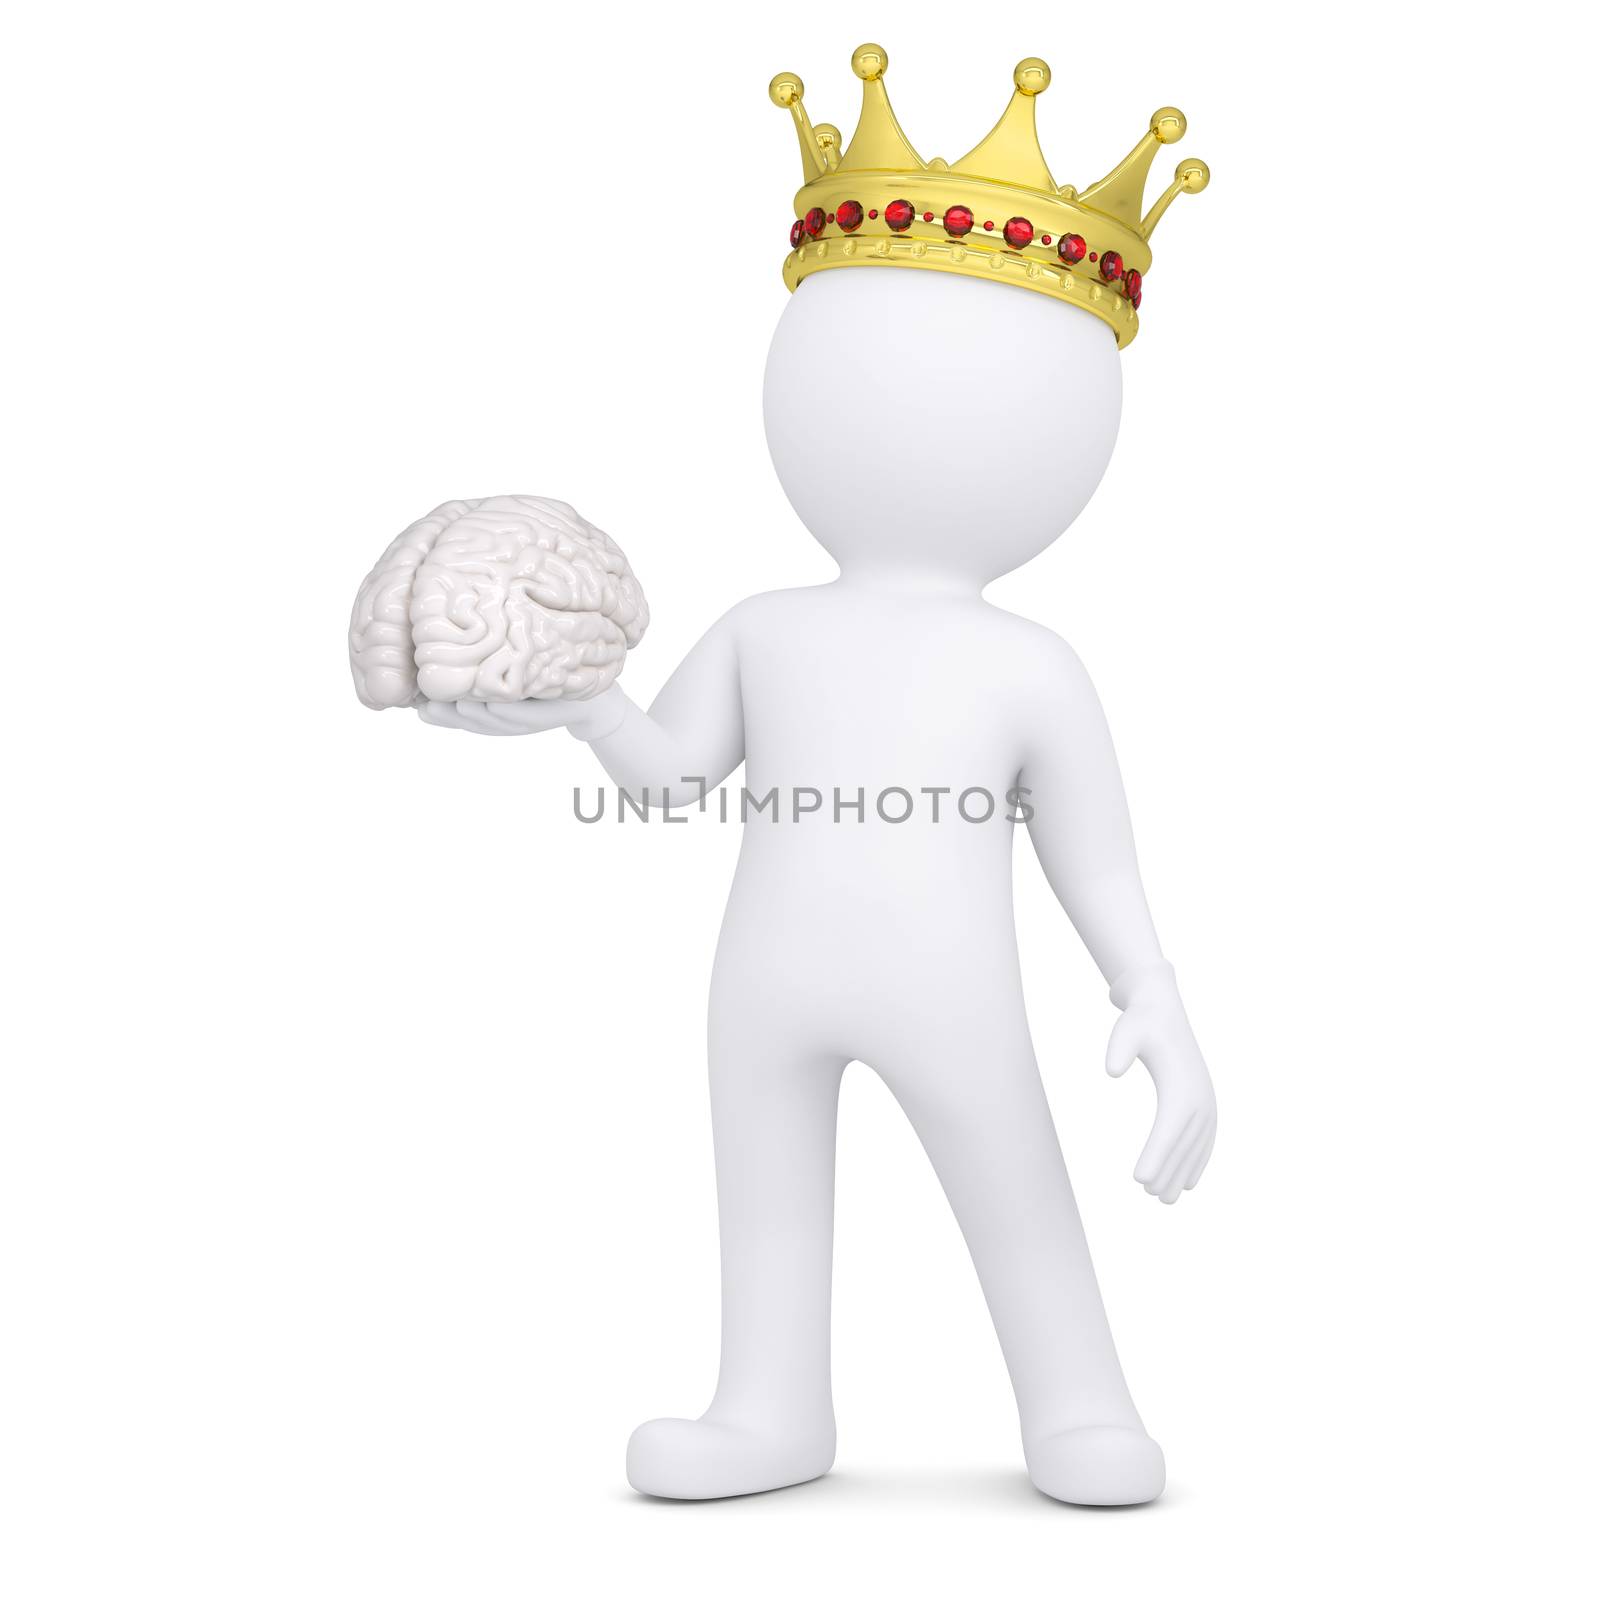 3d white man with a crown keeps the brain. Isolated render on a white background